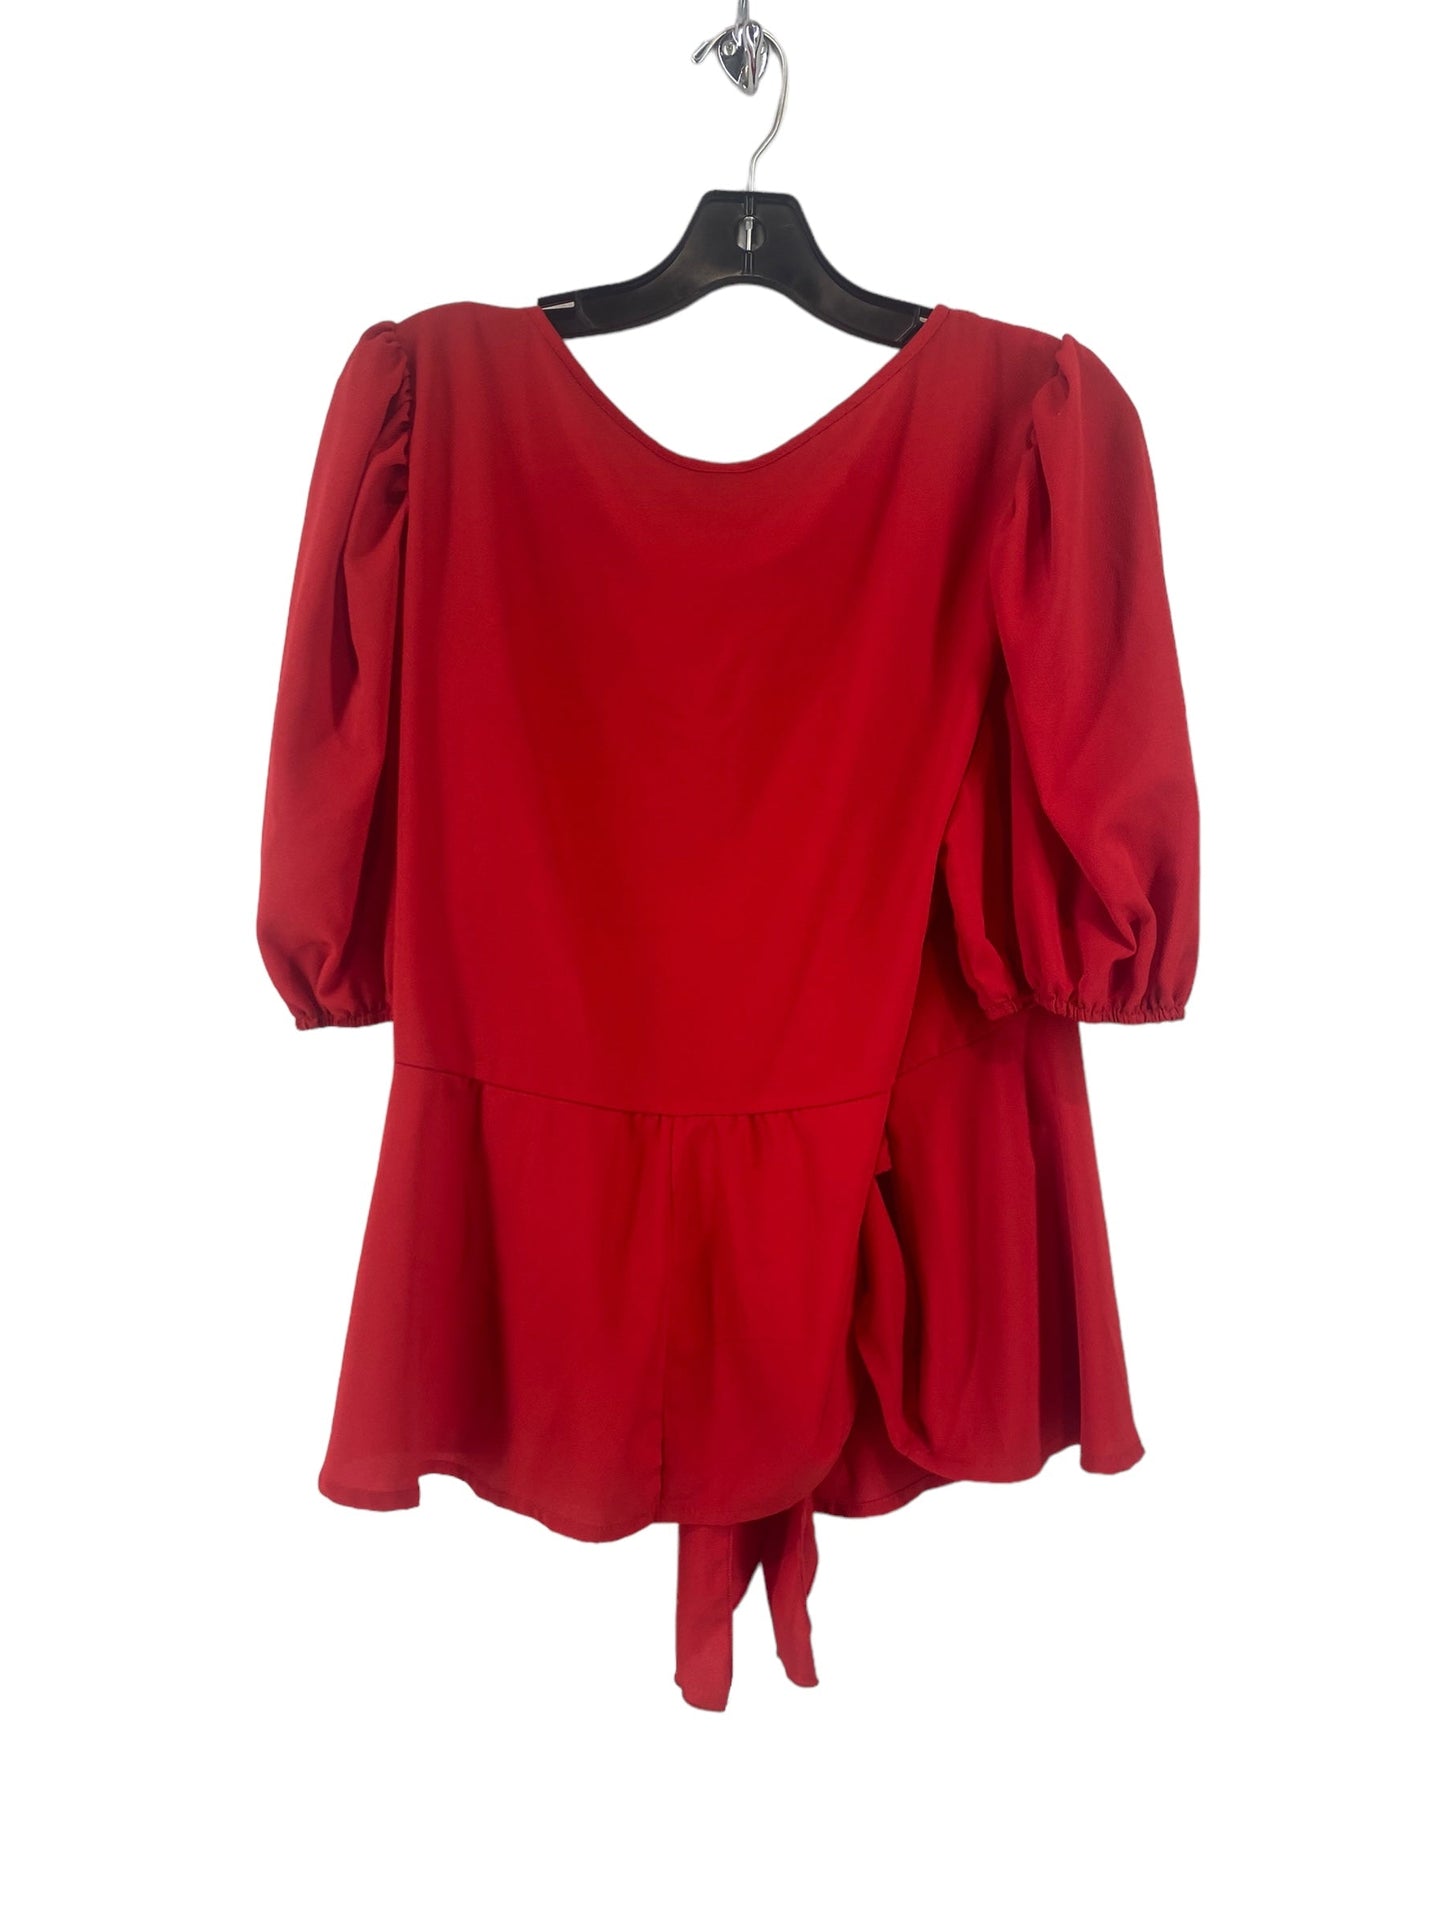 Red Top Short Sleeve Shein, Size 2x